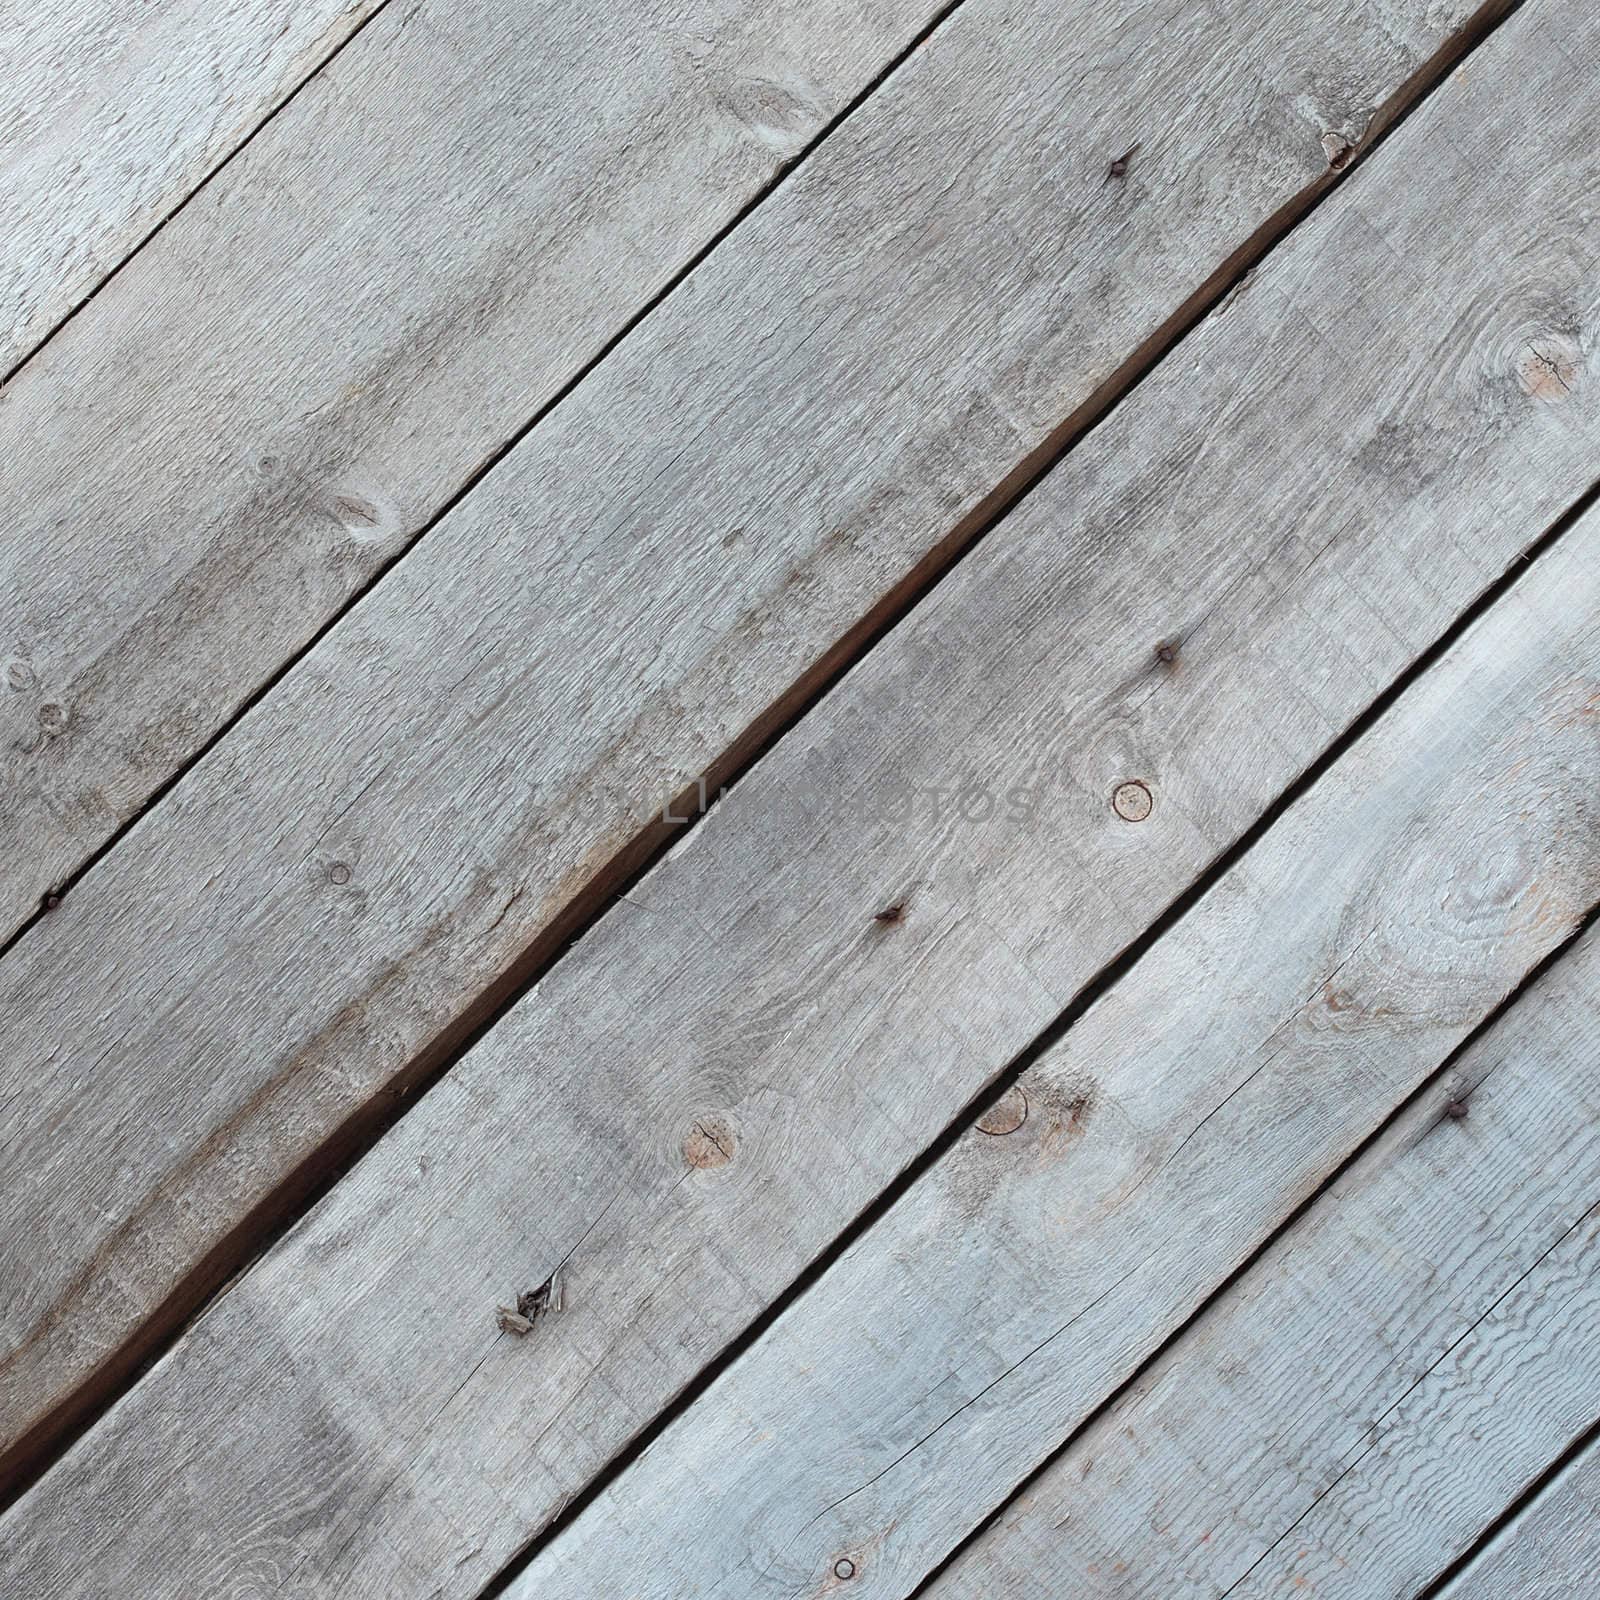 Wood surface - rough old gray pine boards